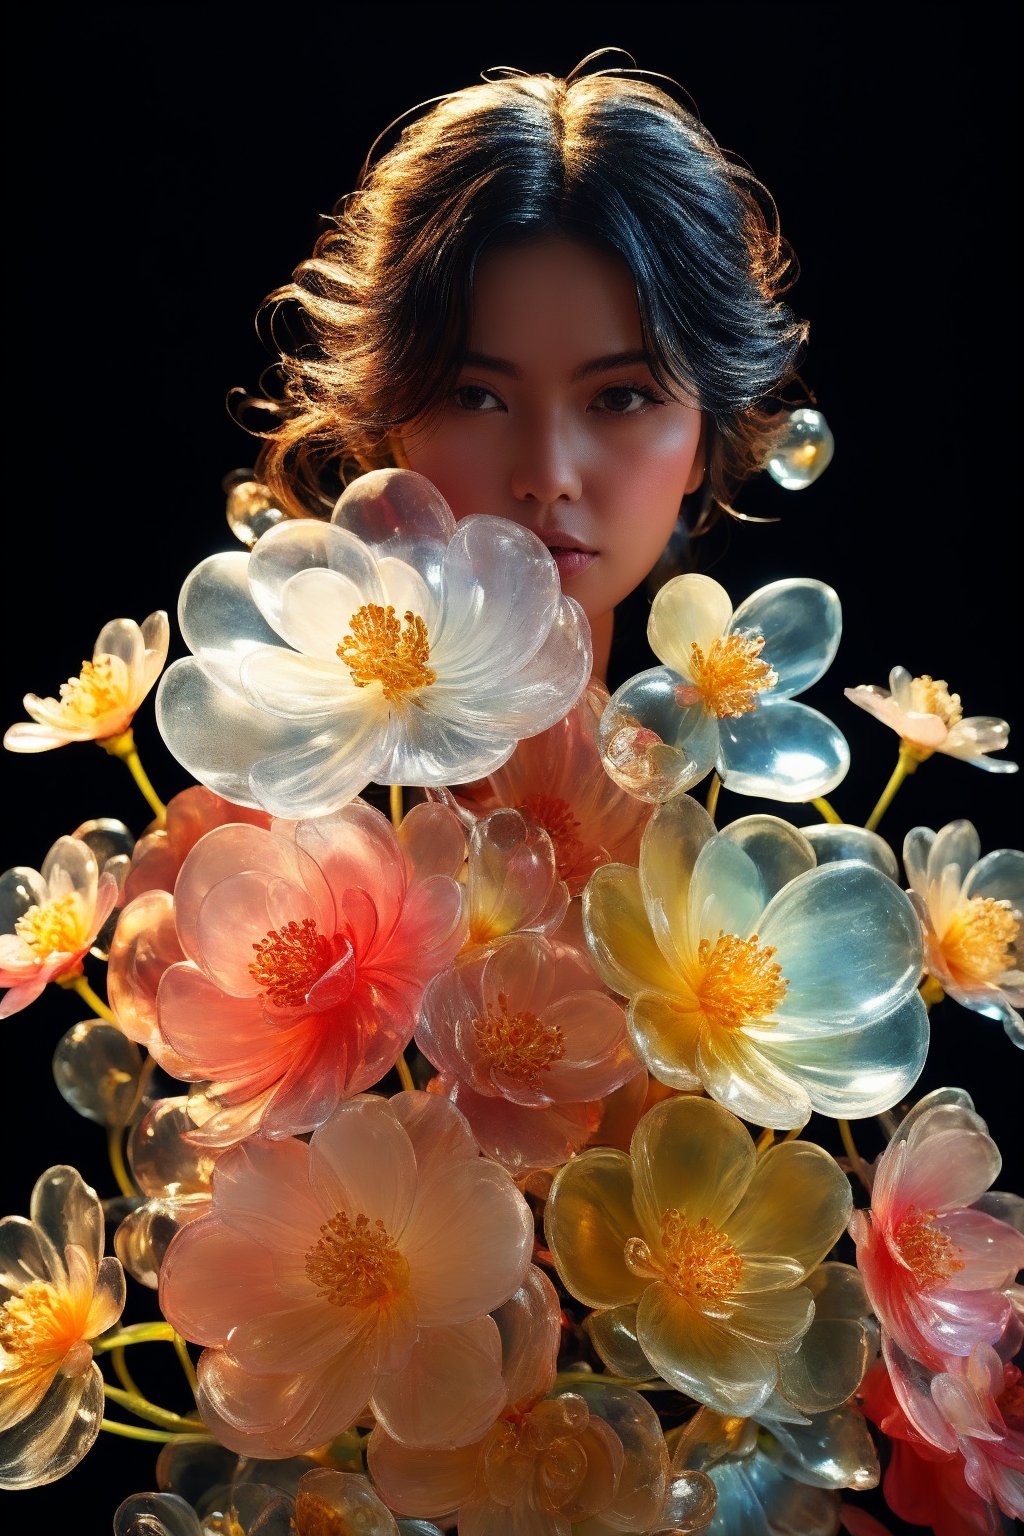 dark room studio portrait, black back drop, black room, darkroom, dimmed environment, a side portrait of an attractive blonde hair tanned woman surrounded by flowers made of glass, olive skin, glowing skin, tanned lines, wearing a elegnat dress made of transparent glass flowers, transparent flower, glass flower, filled with flowers, full of flowers, flower bed (close up shot 1:1) alluring pose, glass statue, attractive pose, epic pose, shot from below, perspective view, dynamic angle, dynamic pose, fashion editorial photography, master piece, hyper realistic, real skin, natural light, wall made of glass flowers, wall filled with flowers made of glass, dreamy, surreal, enchanting, back lit photography, dramatic lighting, high contrast, studio photography, portrait photography, intimate, super closeup shot,  focused on subject, desaturated, artistic, pop art, sophisticated pose, back light silhouette photography, art photography, avant garde fashion photography, macro lens photography, gigantic transparent glass flowers, monumental scale, giant flower sculptures,Transparent Glass Flowers